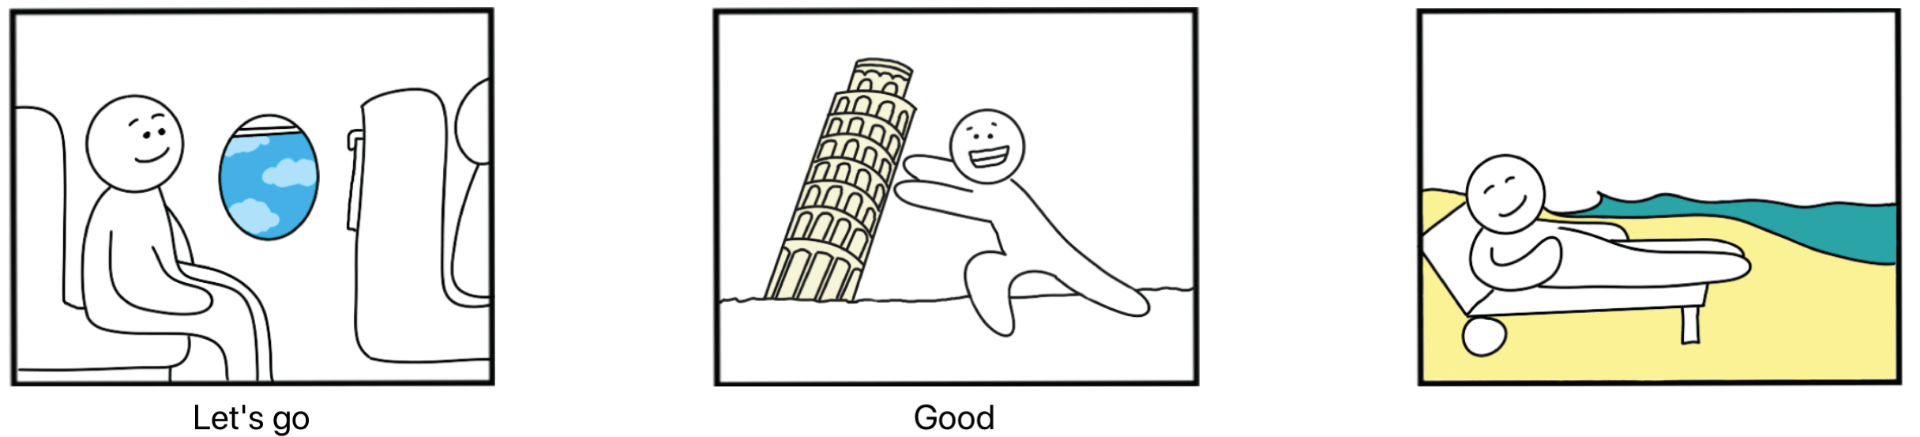 Three panel stick figure comic strip. Panel 1: person seated on a plane above the caption “lets go”. Panel 2: person pictured next to leaning tower of Pisa above the caption “Good”. Panel 3: person laid on a sun-lounger at the beach. Panel 3 has no caption.